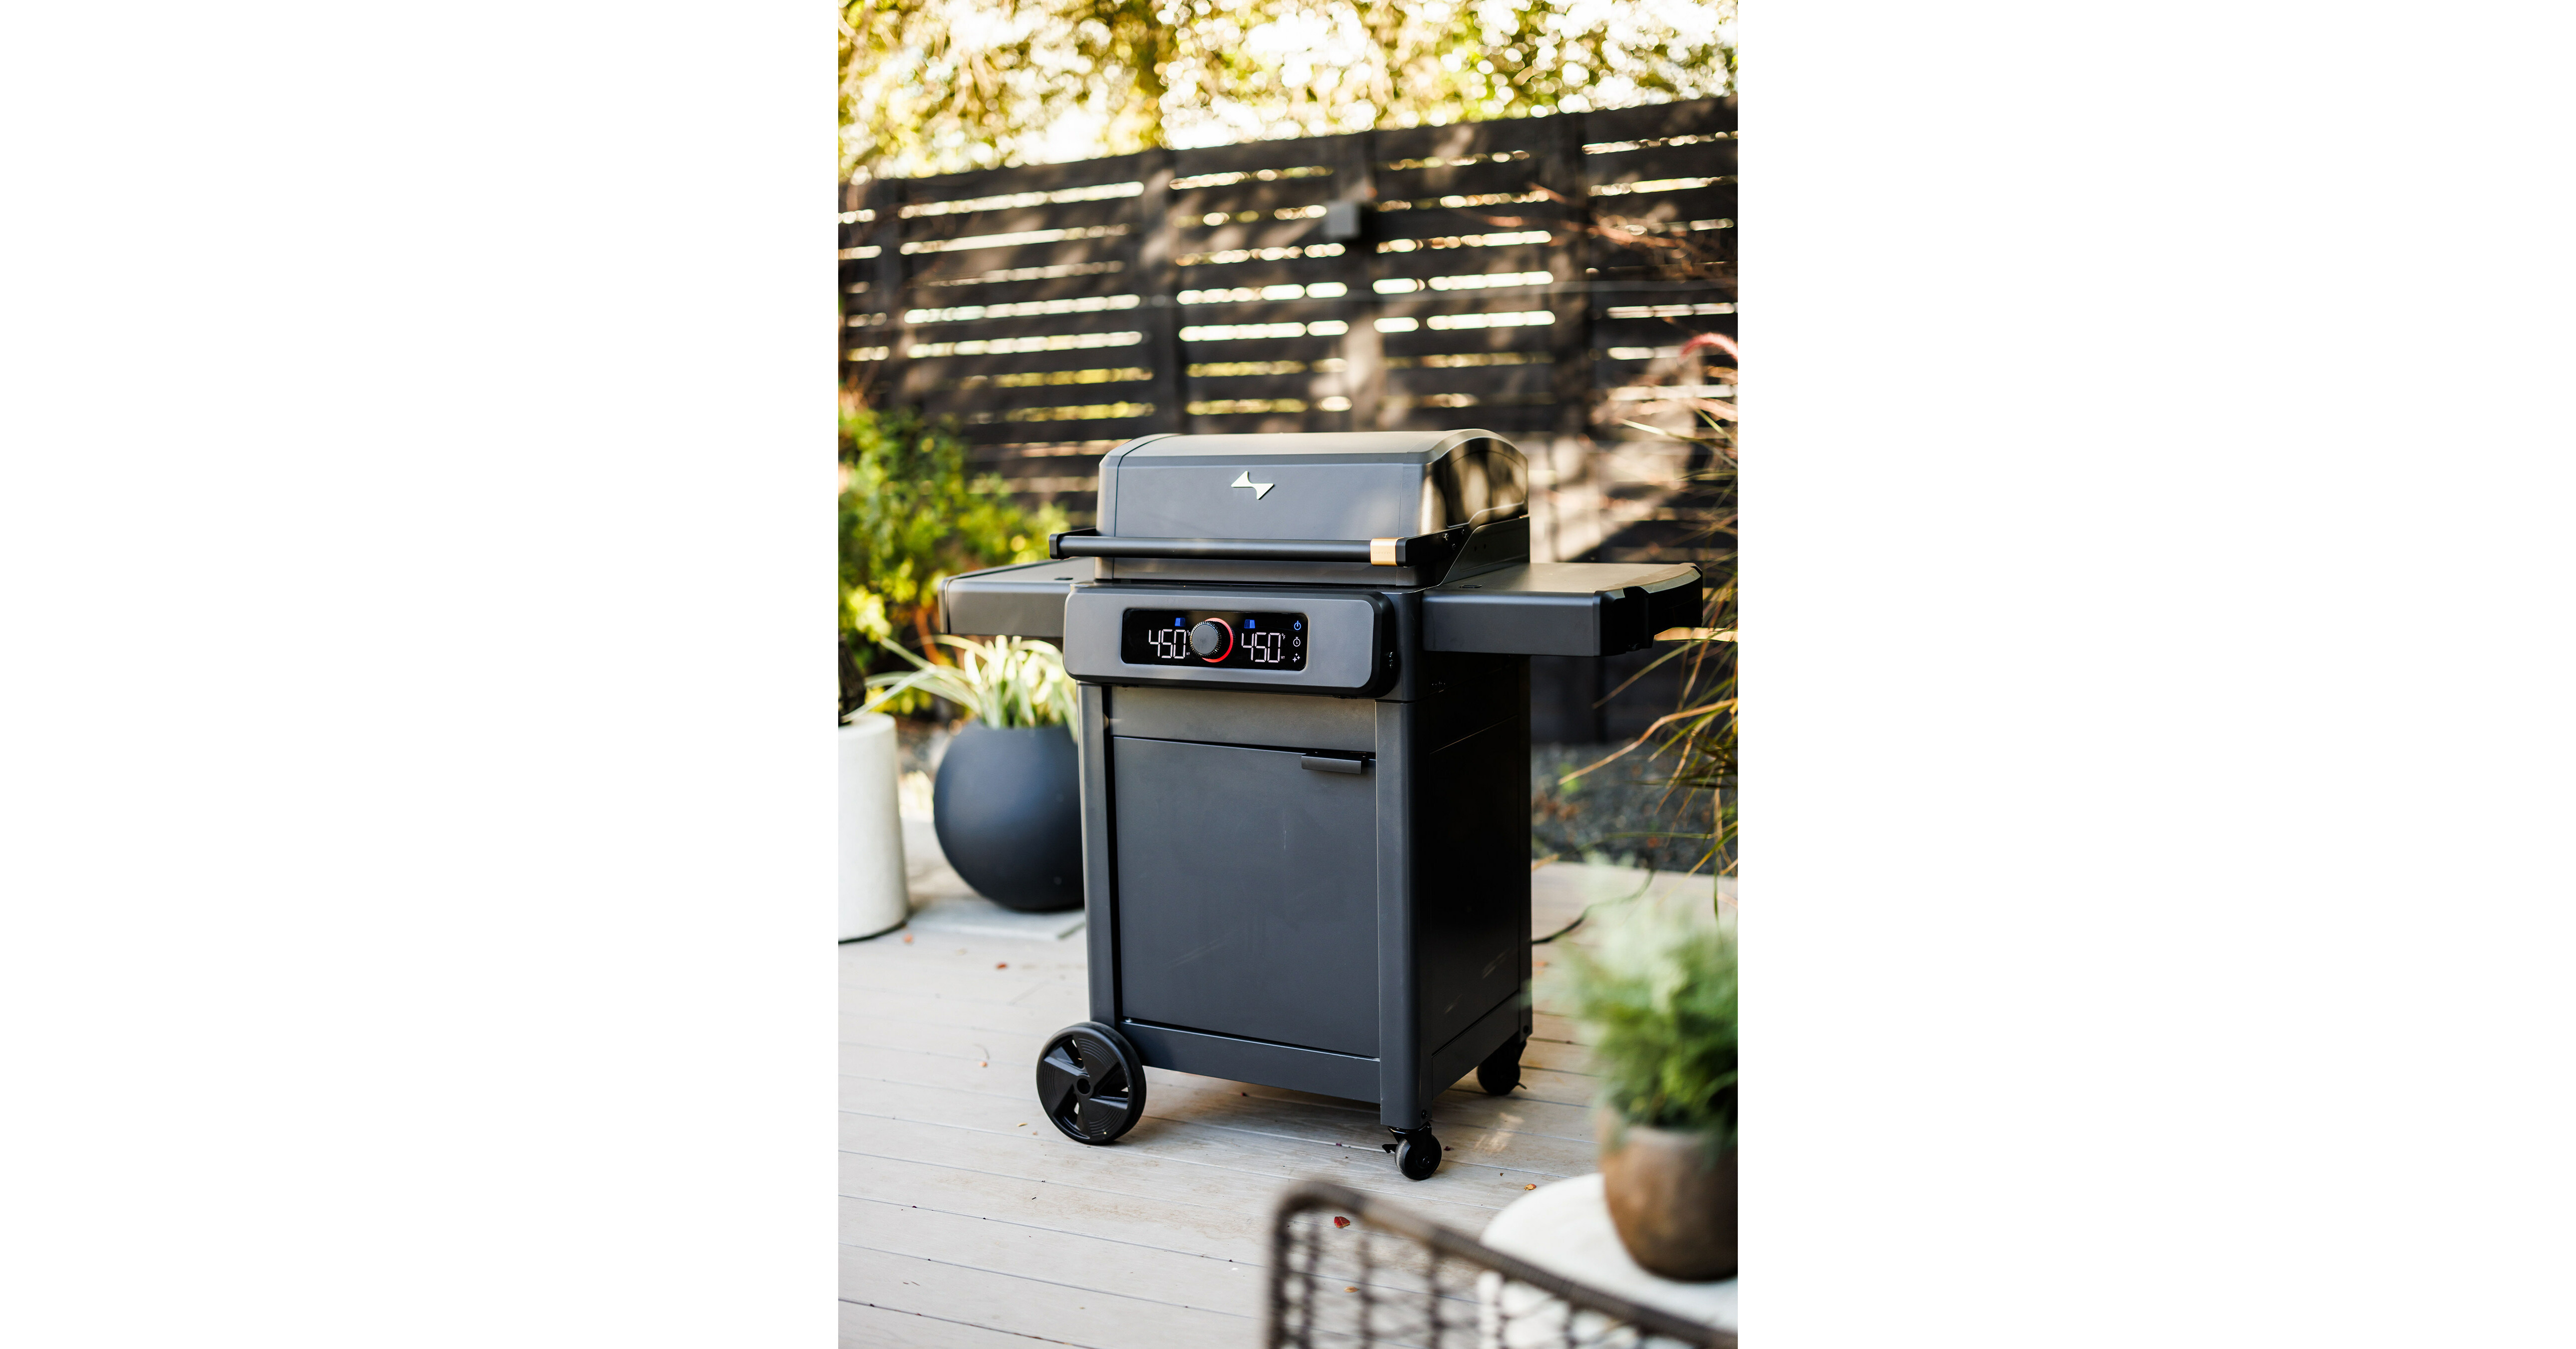 Current Backyard Unveils Wi-Fi-Enabled Grill for Safe Patio Parties